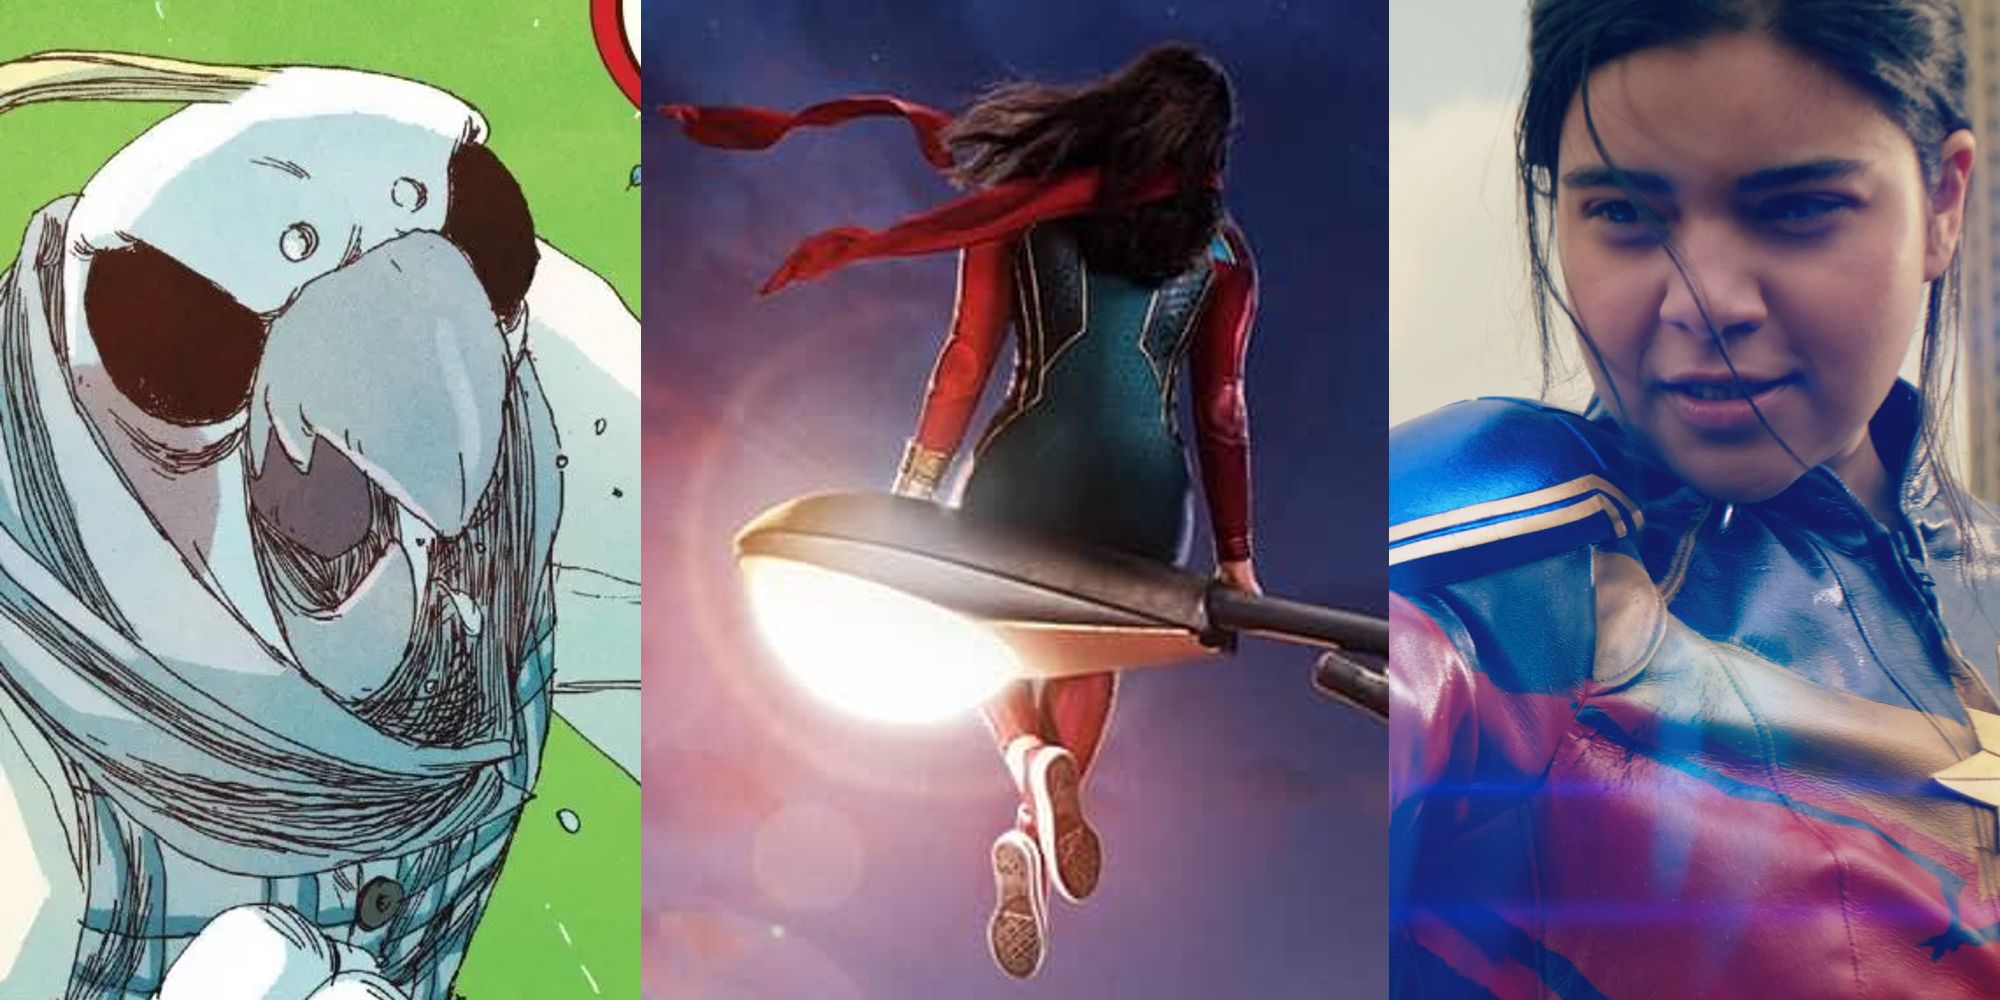 The Inventor appearing in a Ms. Marvel comic; Kamala Khan sitting on a streetlight on the Ms Marvel poster; Iman Vellani as Ms Marvel using her powers